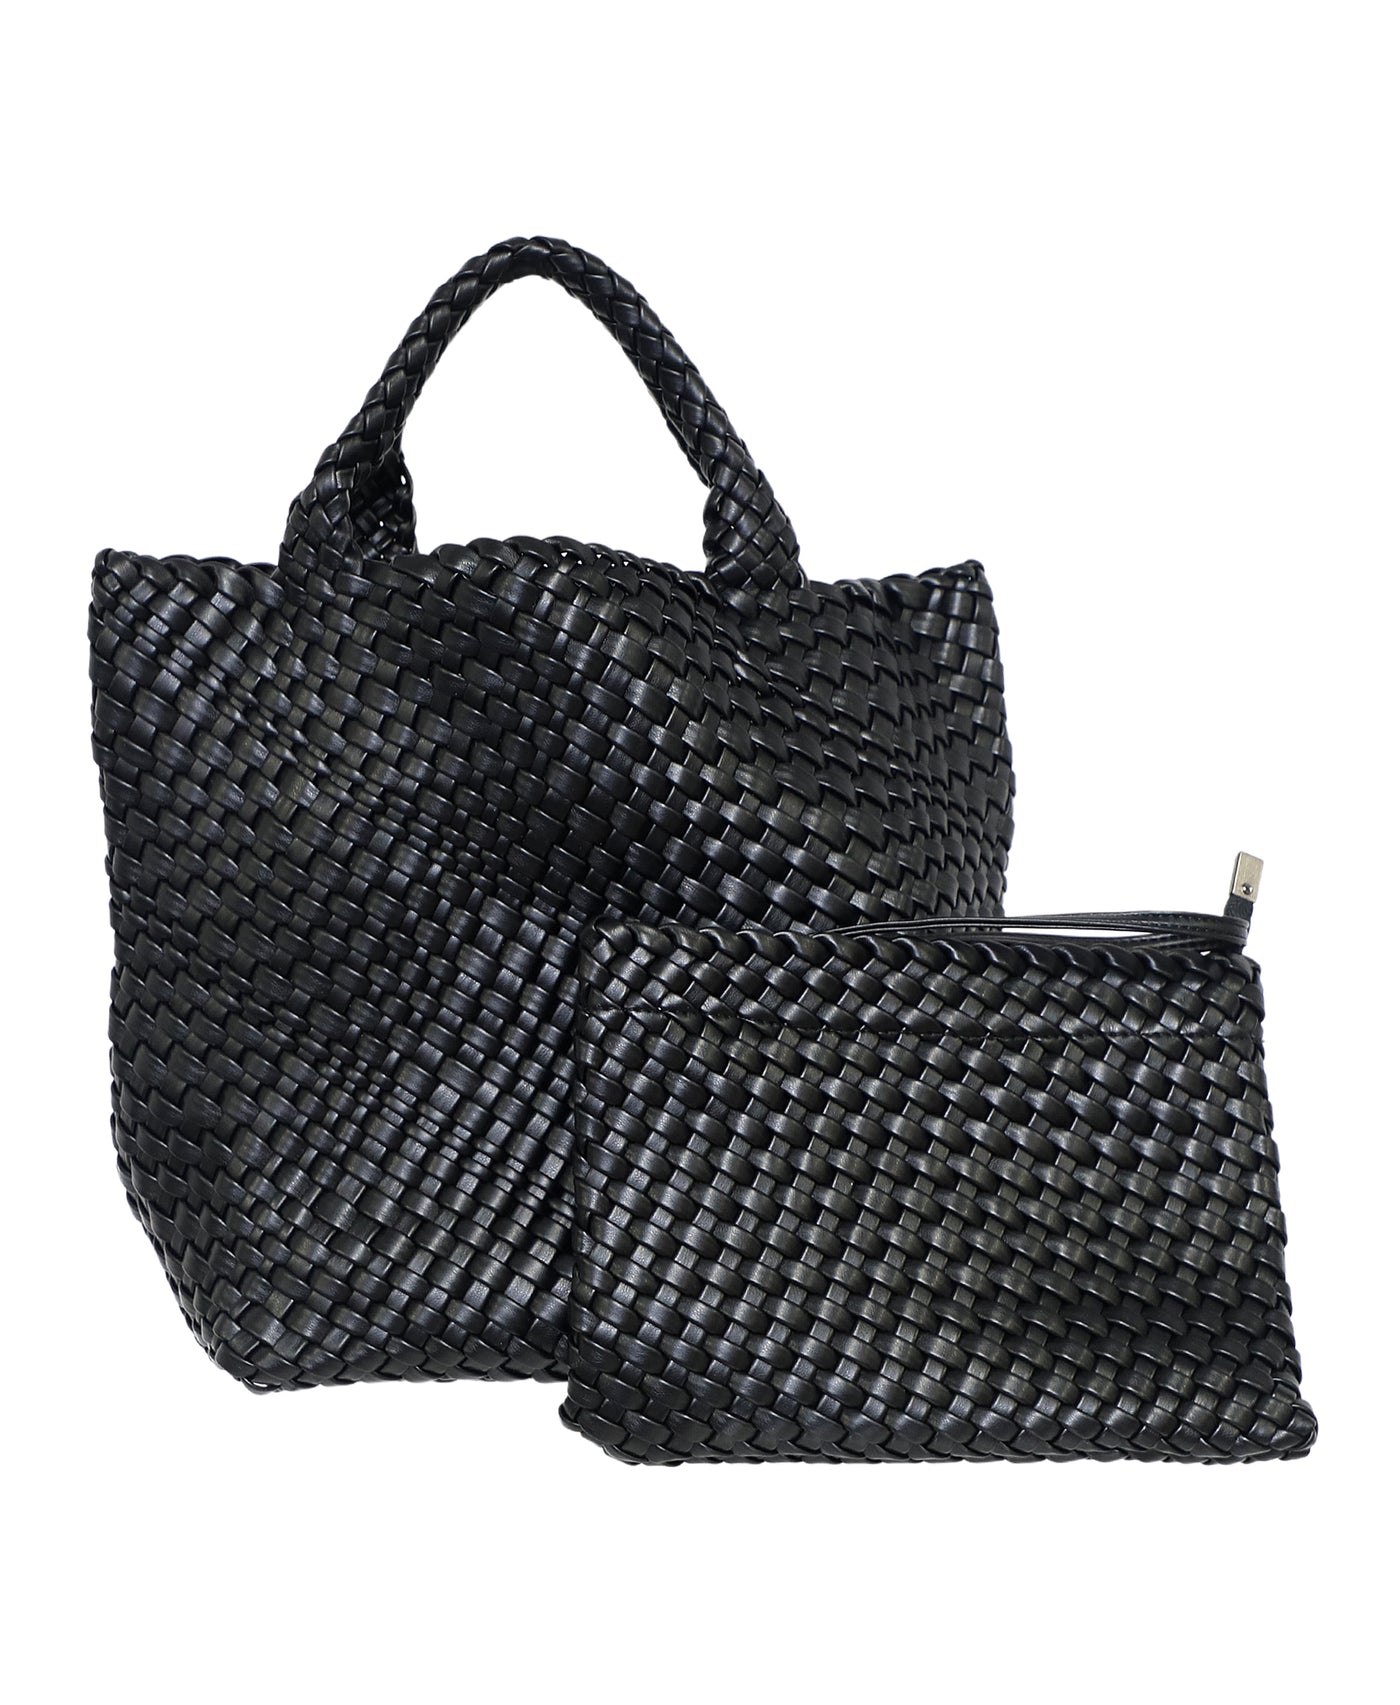 Hand Woven Tote Bag w/ Insert image 2